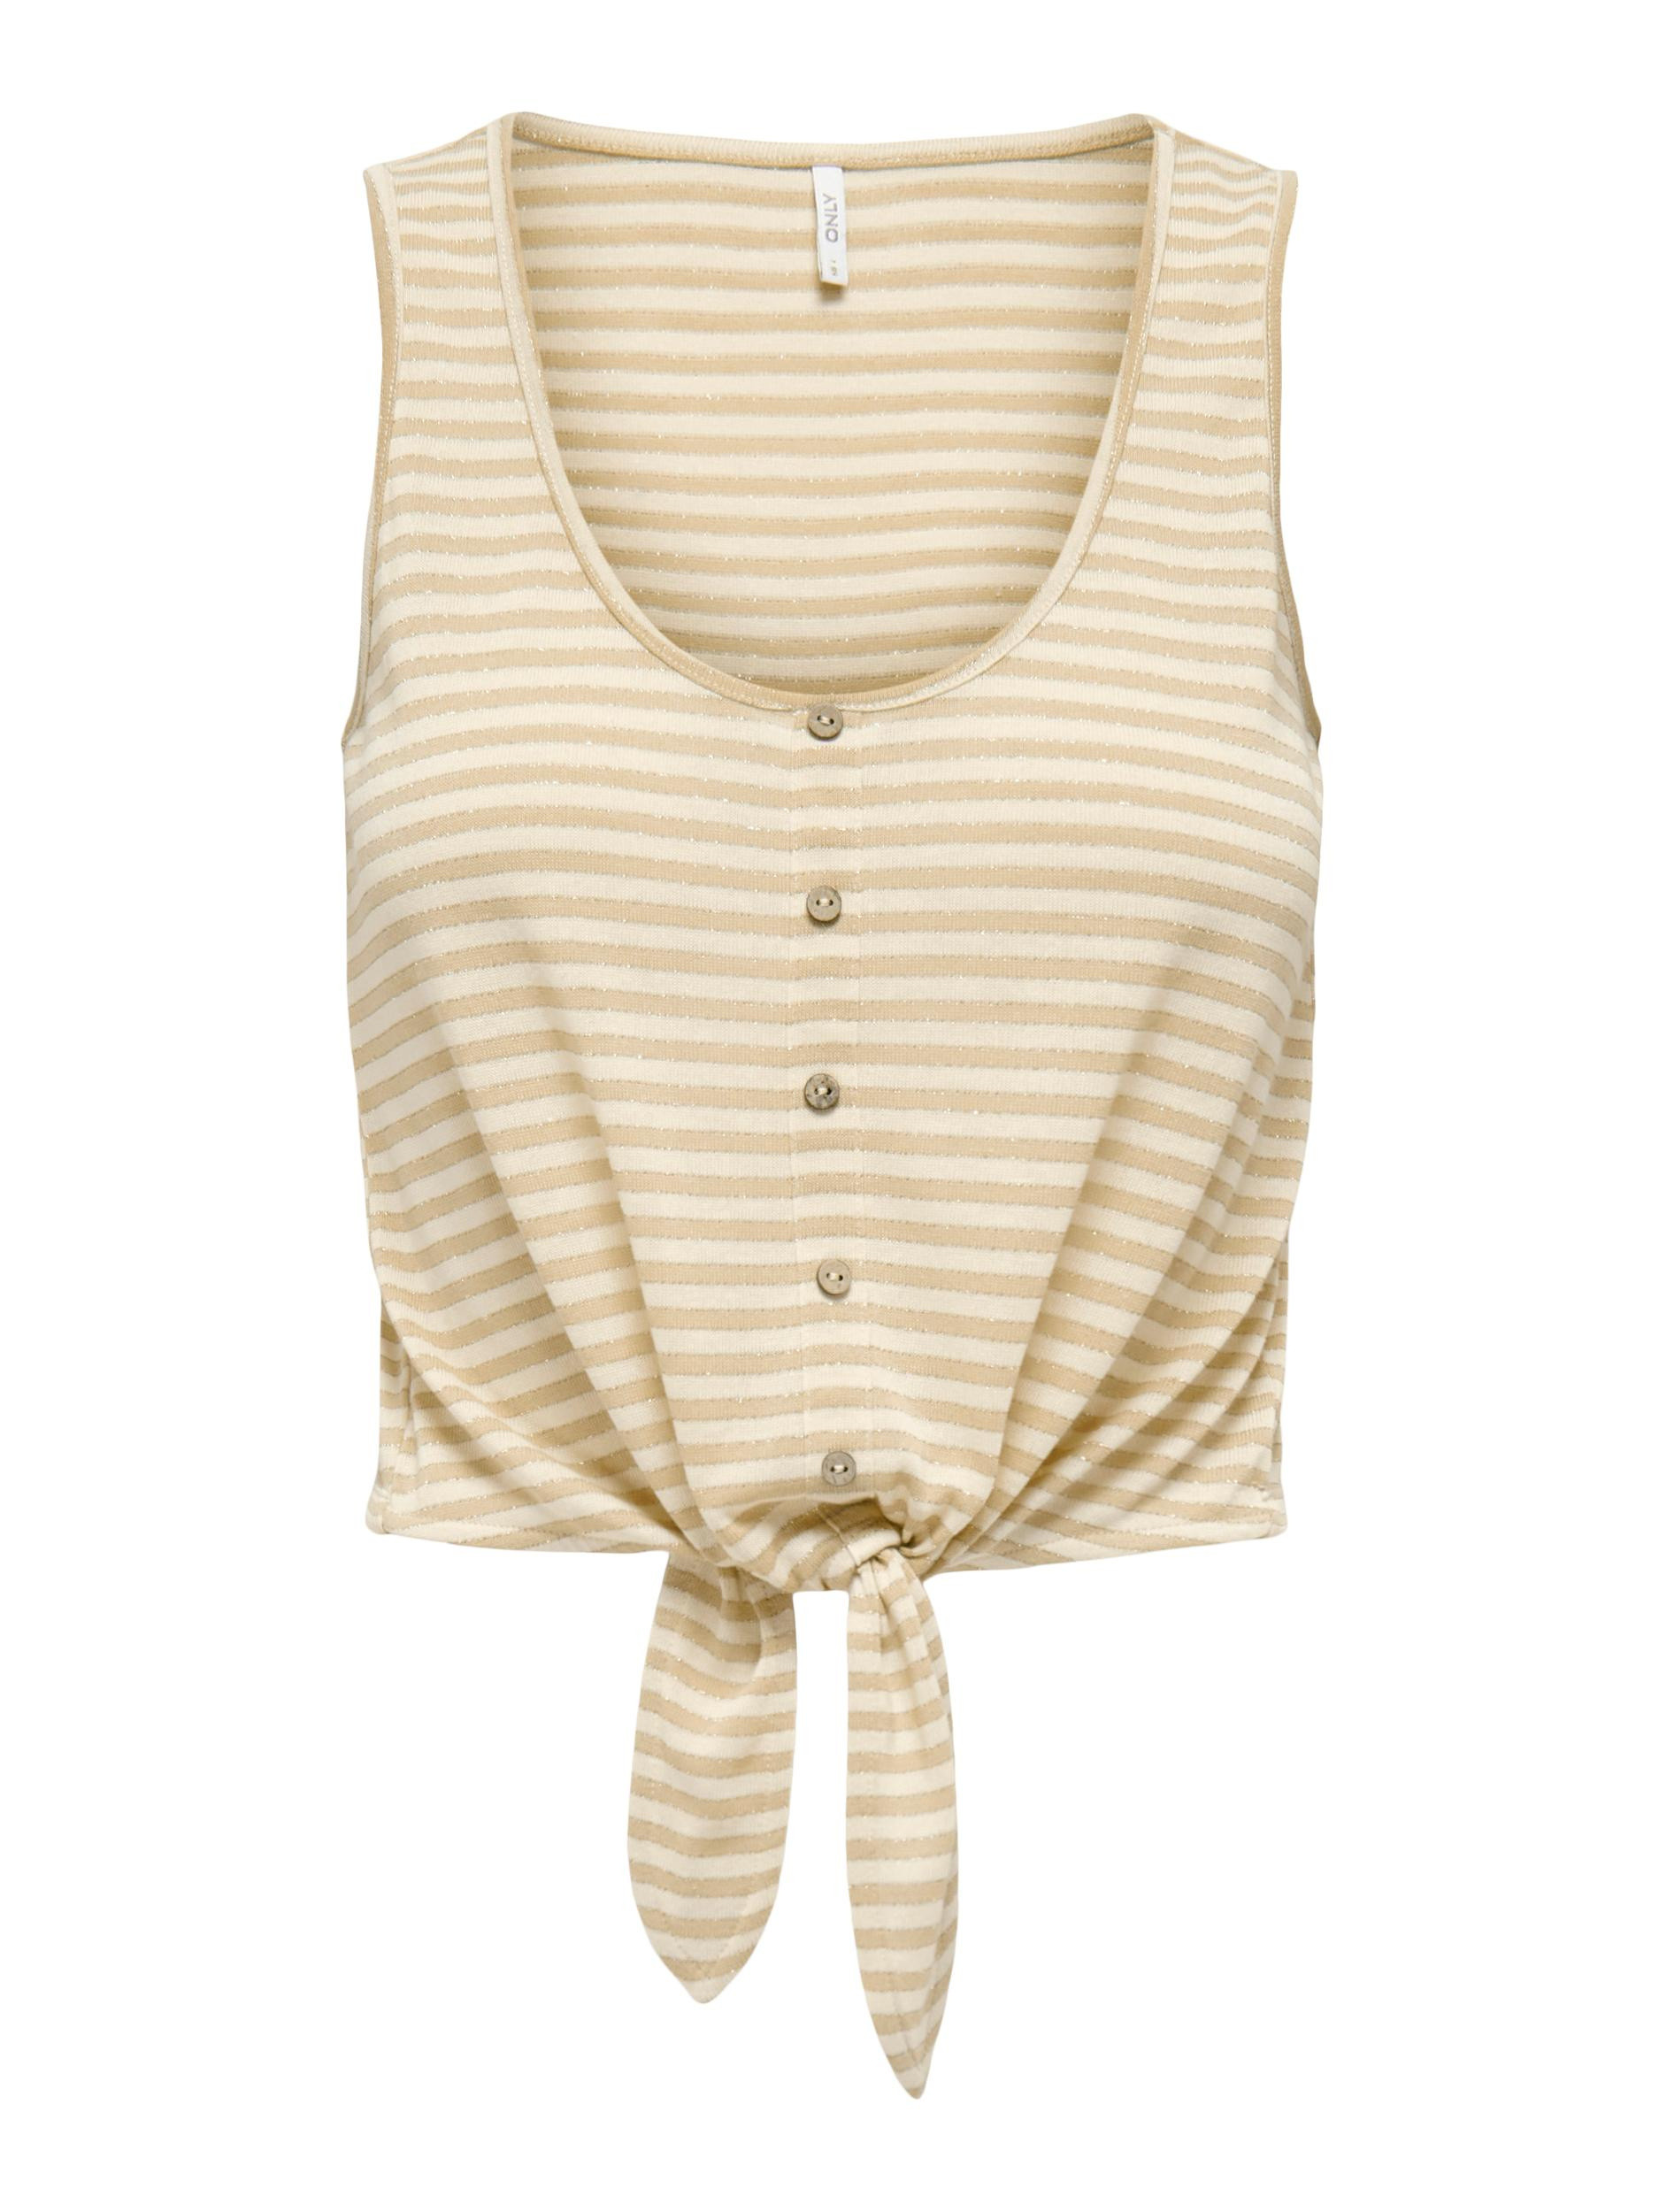 Only - Striped tank top, Cream, large image number 0